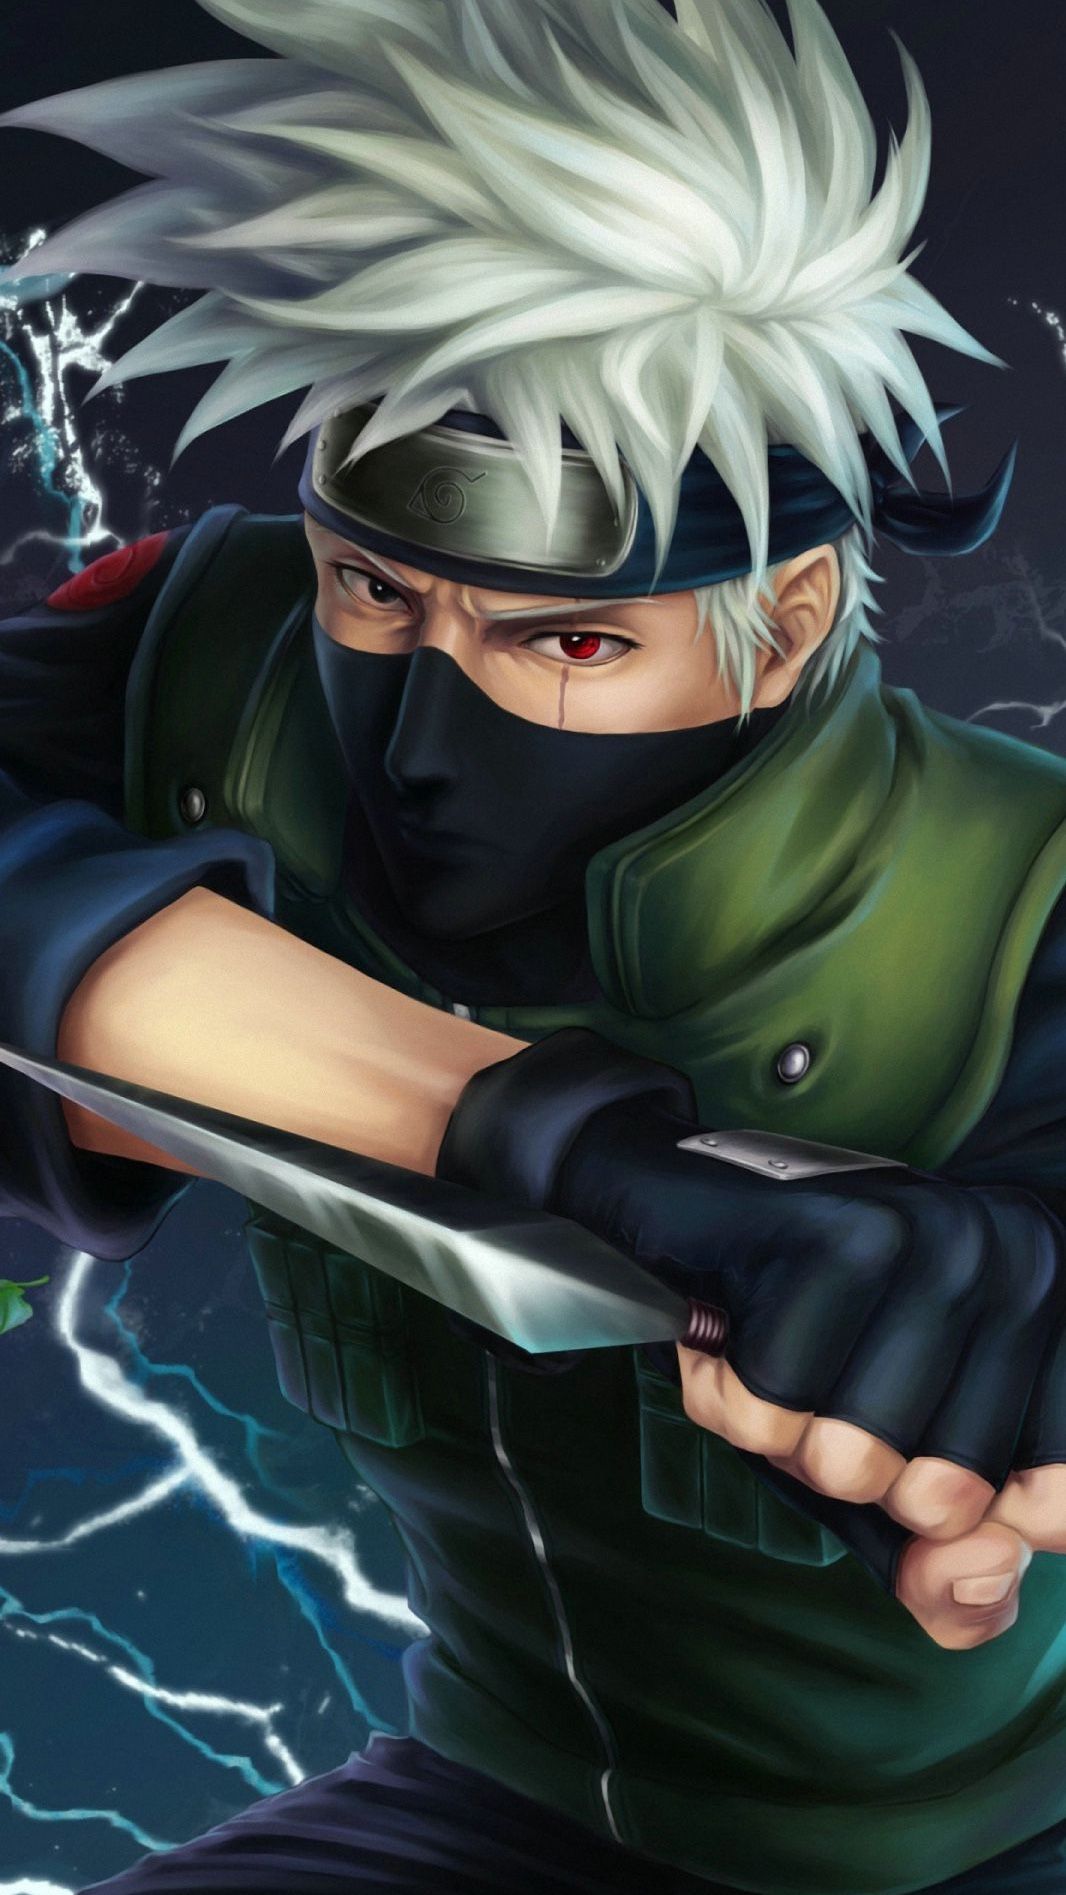 Check the link to download HD wallpaper of Naruto and more